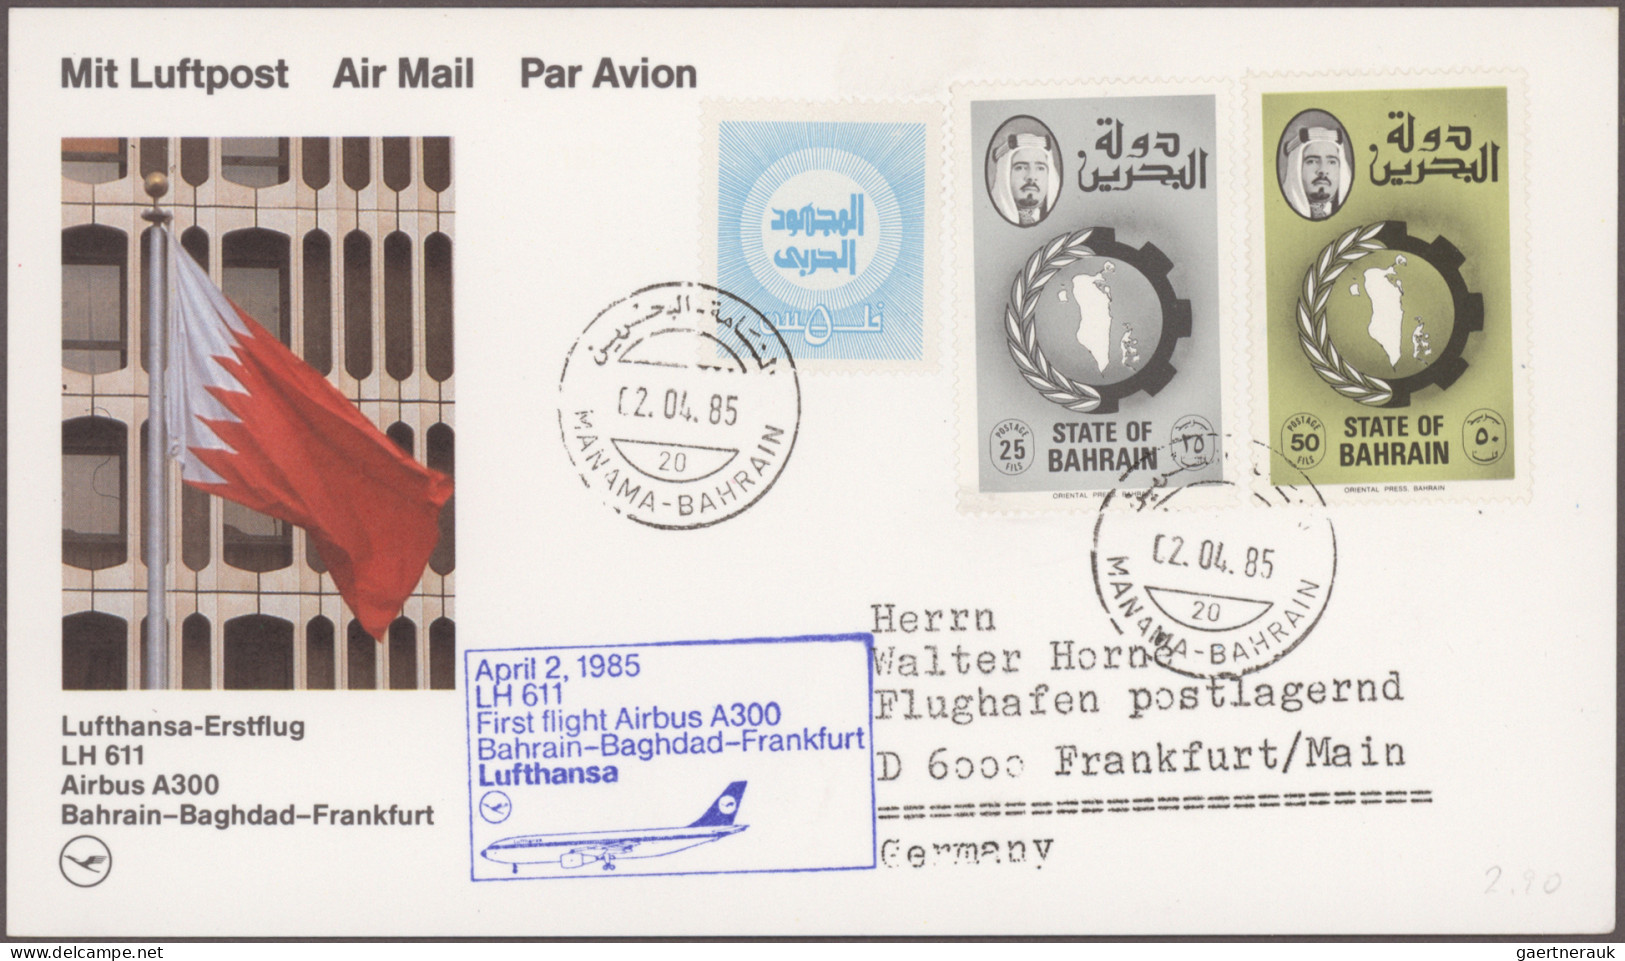 Asia: 1960/1988, Balance Of Apprx. 474 FIRST FLIGHT Covers/cards, All Asia-relat - Autres - Asie